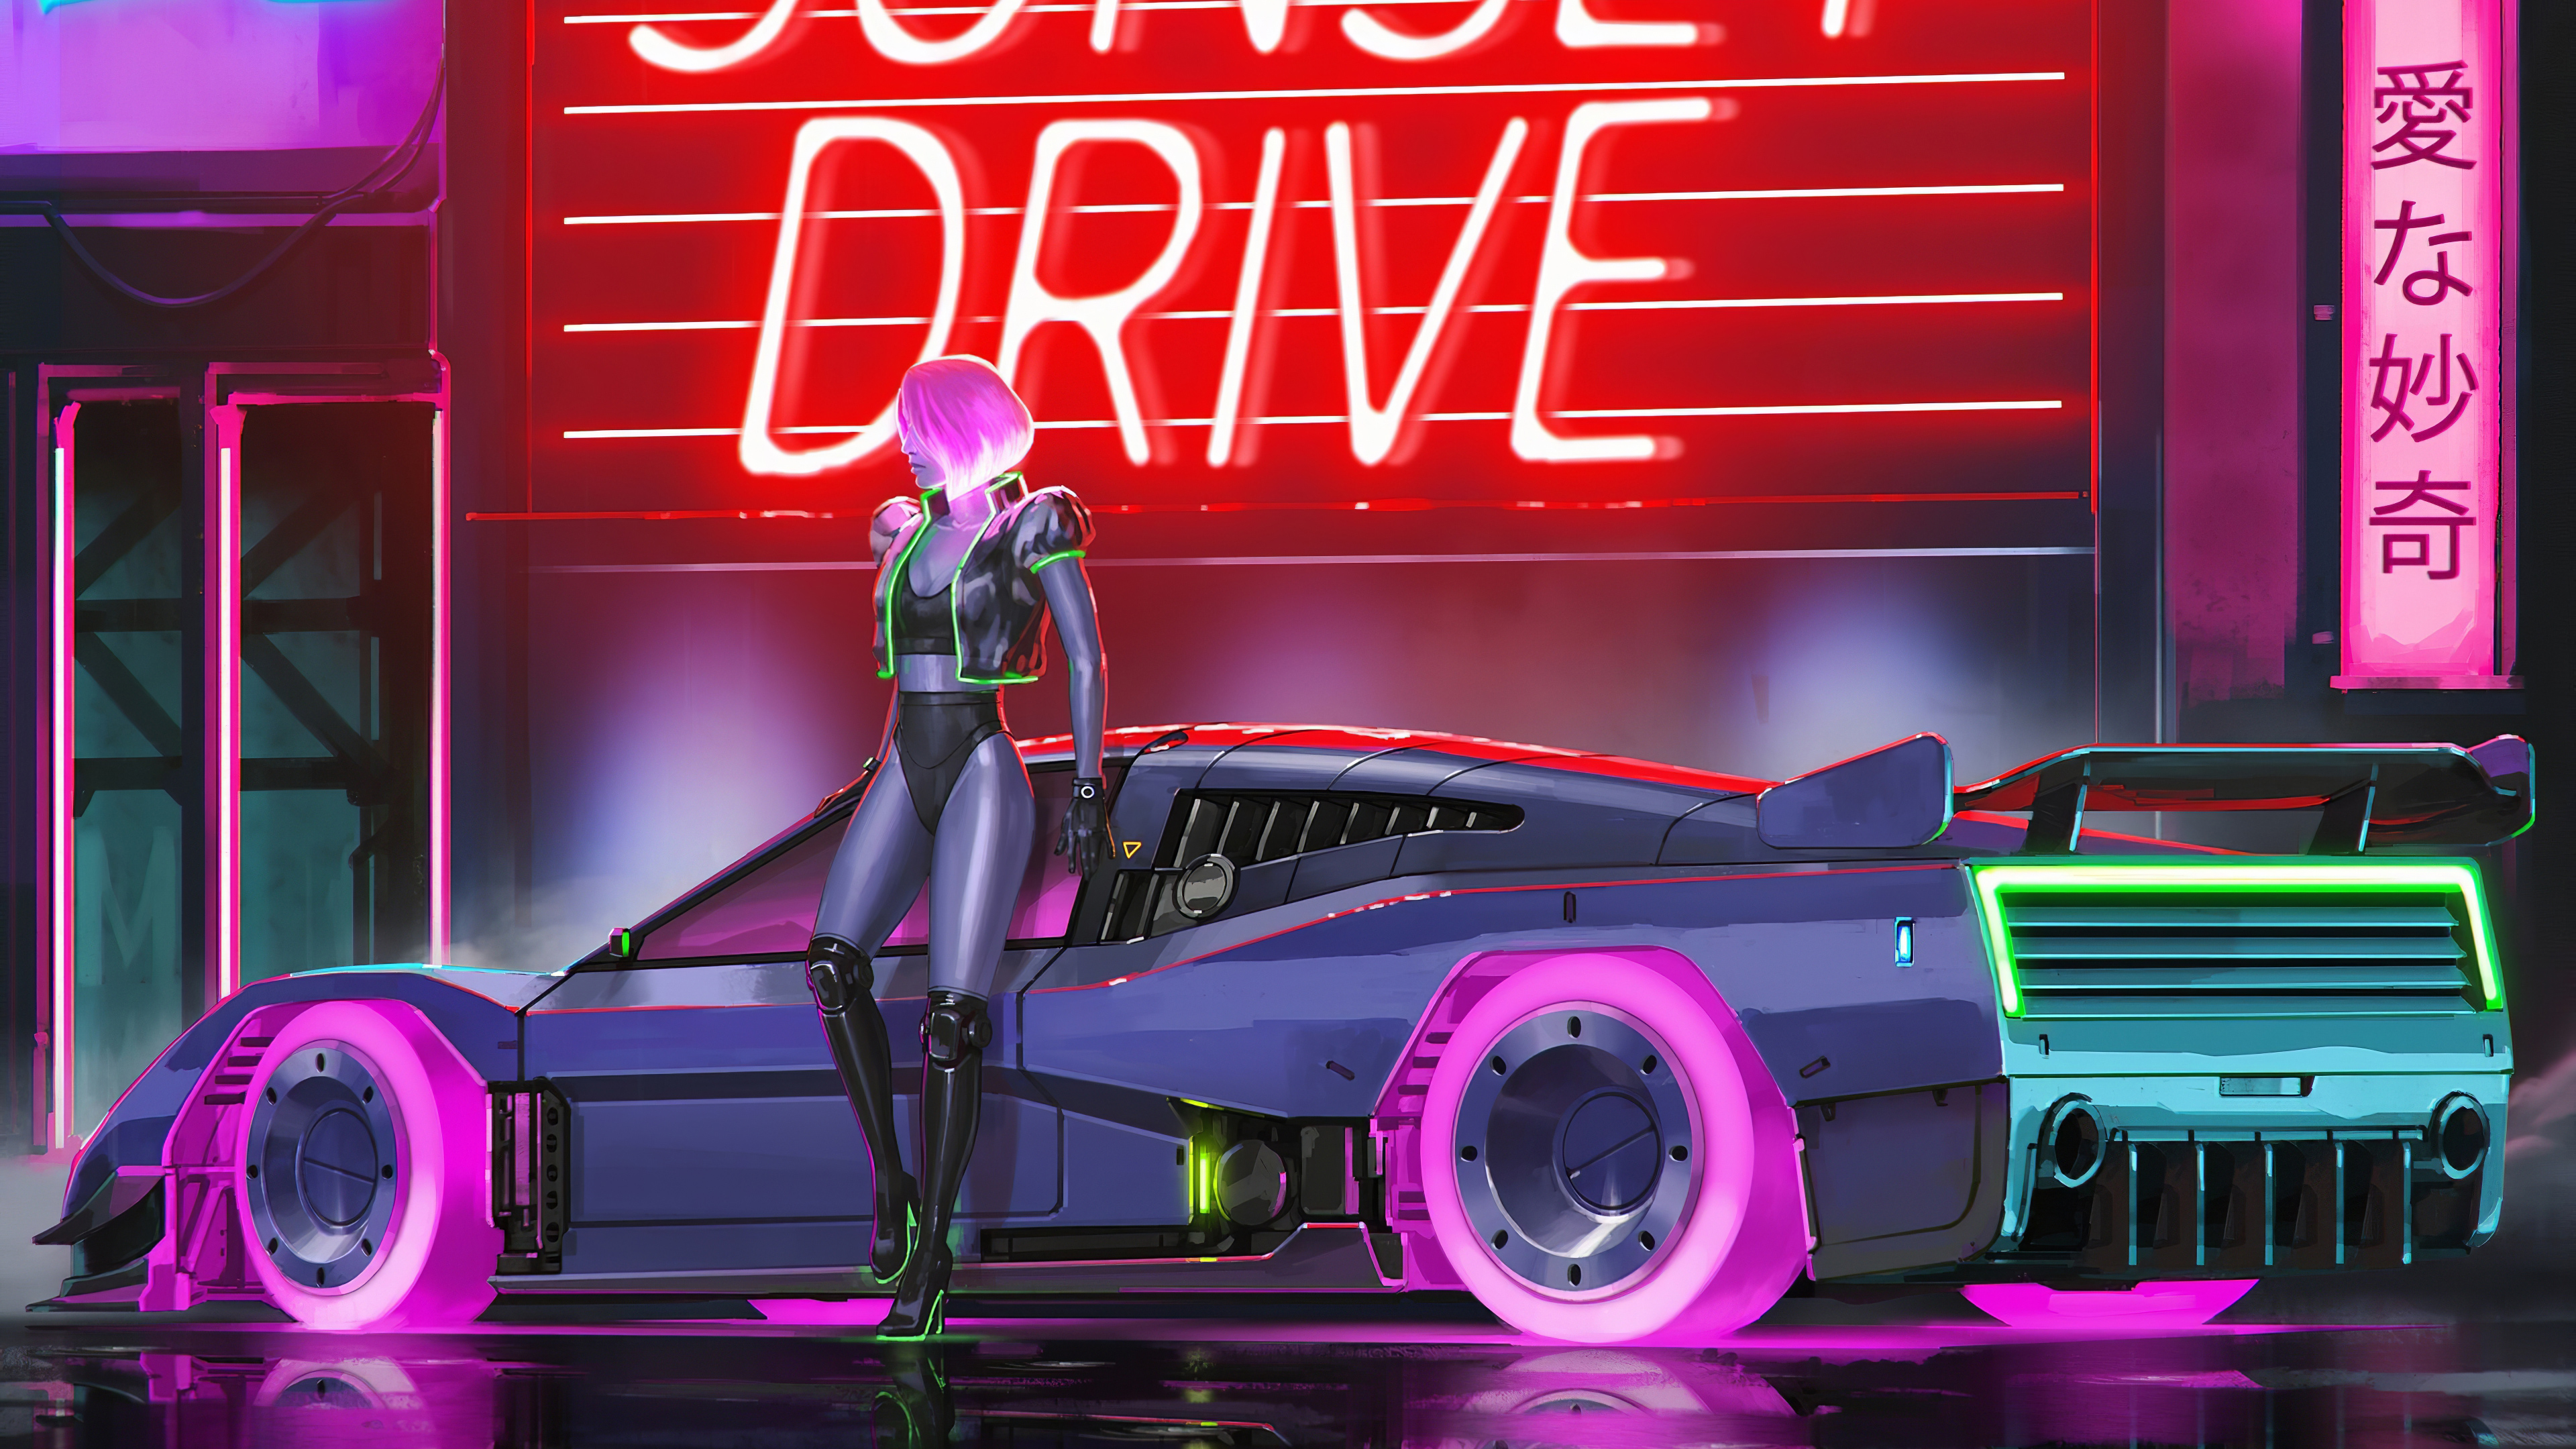 Sunset Drive Synthwave 4k HD Artist Wallpapers Images.